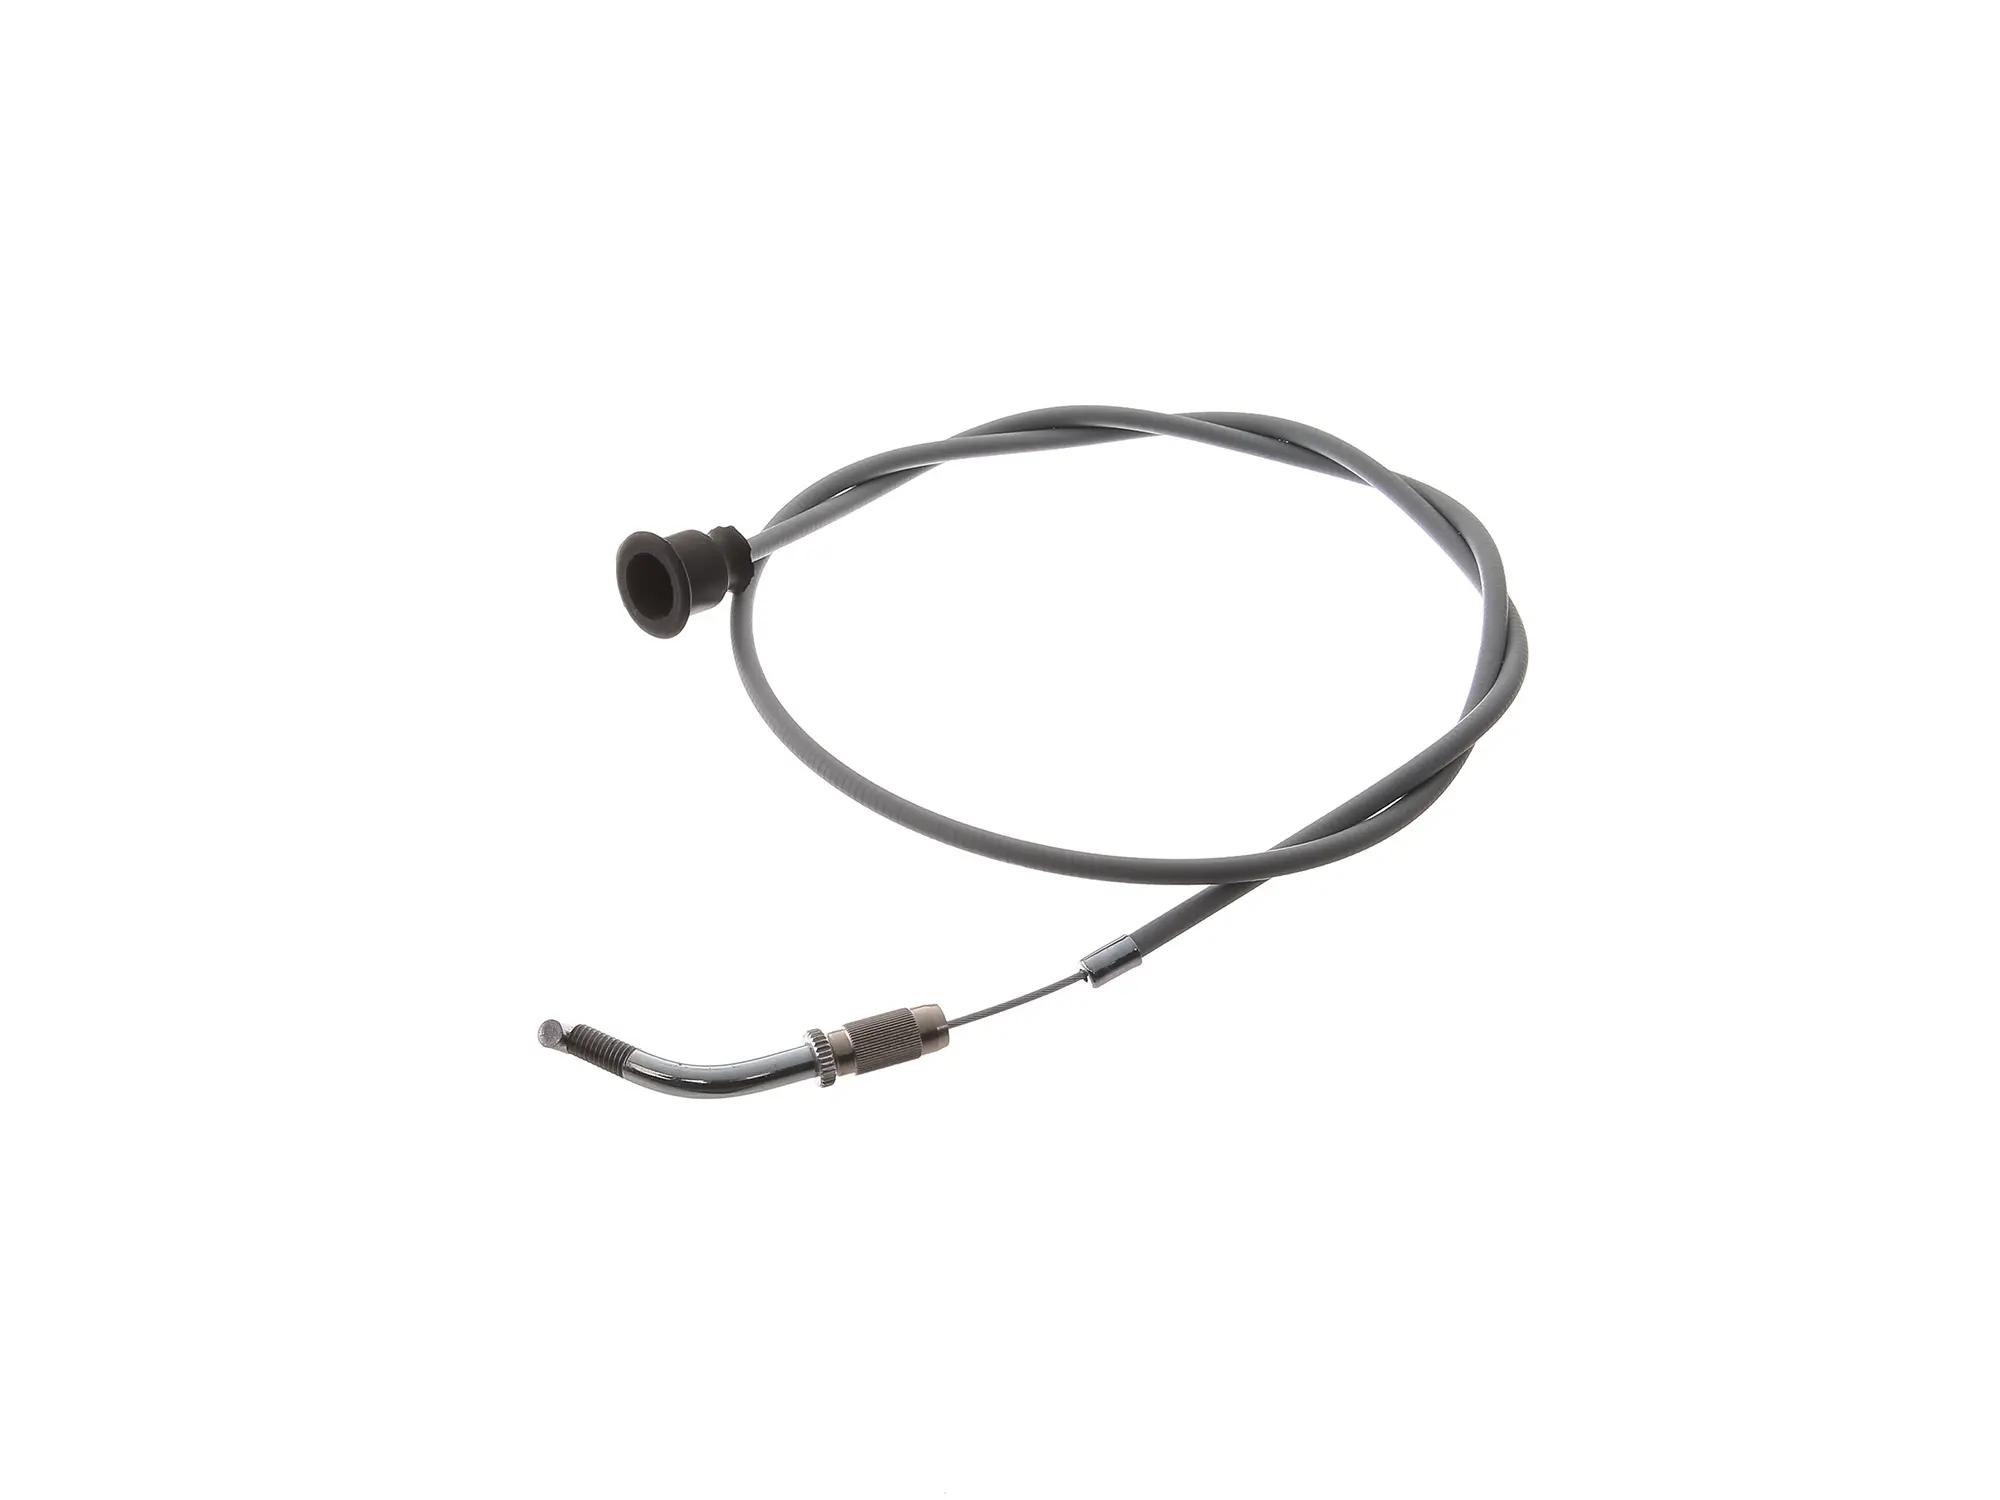 Throttle cable, gray - for Simson SL1 moped, Item no: 10066847 - Image 1